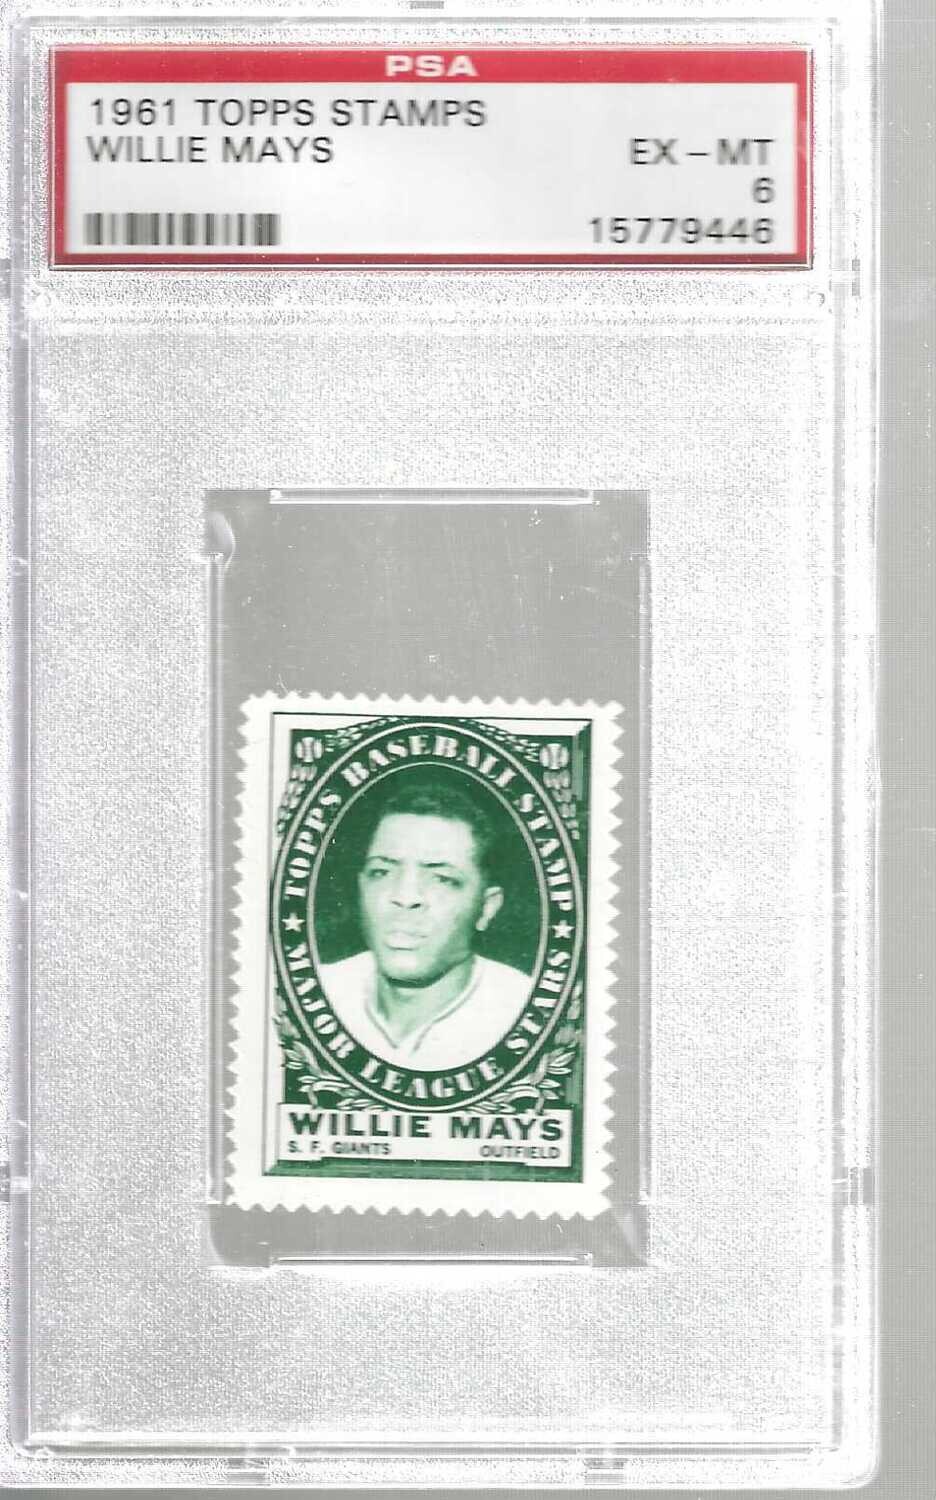 1961 Topps Stamps Wilie Mays PSA 6